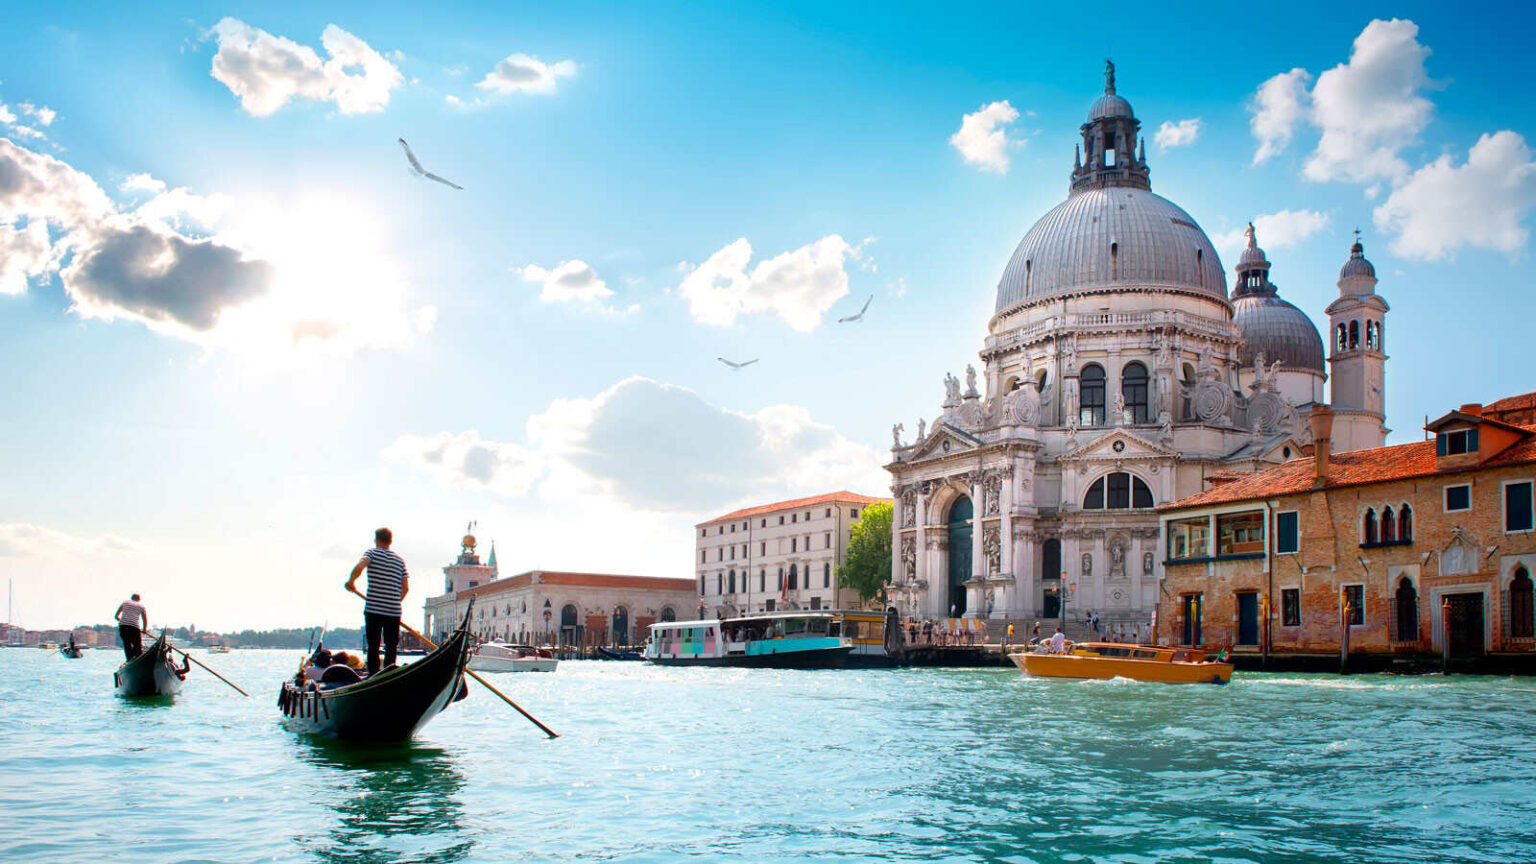 Looking for the perfect climate to retire or a place to live for a while? Discover la dolce vita and savor everything the Italian way of life has to offer.